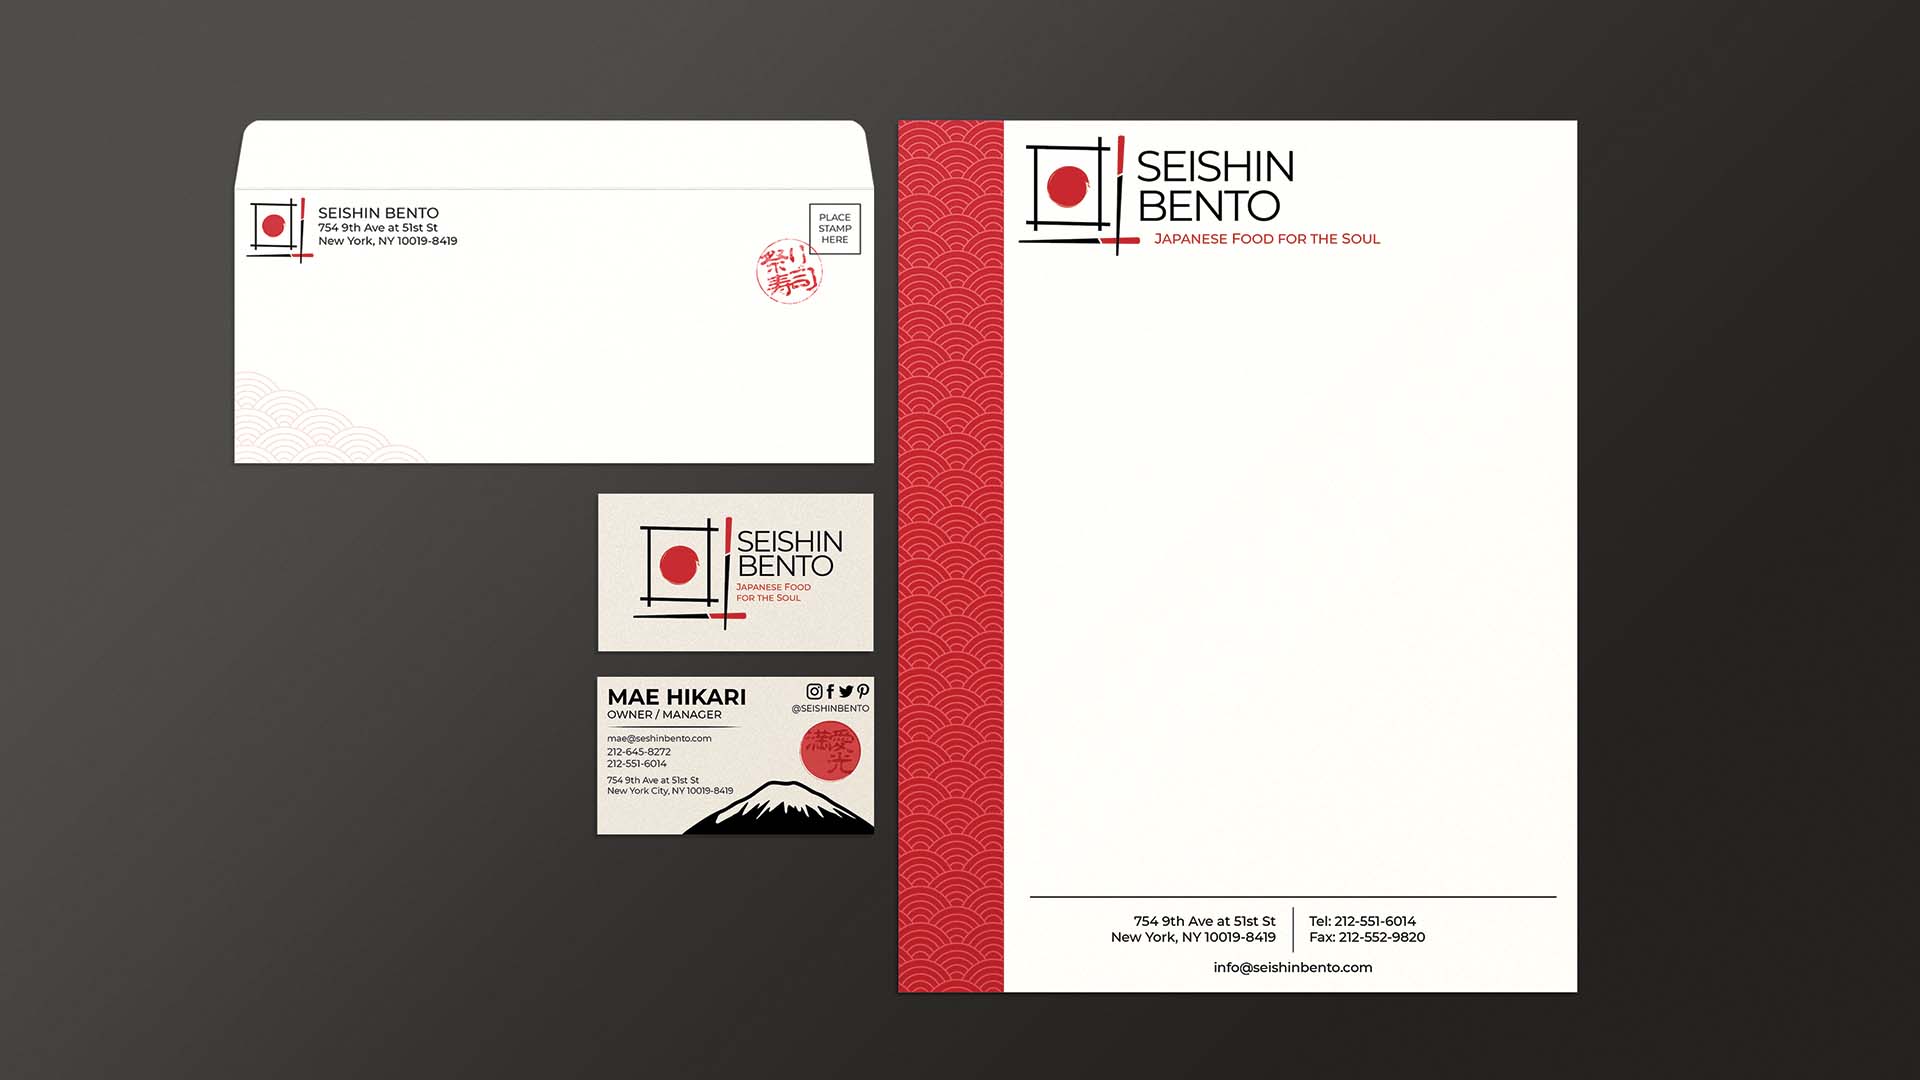  / “Seishin Bento”; Business Suite, 2.5 x 3 inches business card, 4.125 x 9.5 inches envelope, 8.5 x 11 inches letterhead, 2021. Stationery created for a Japanese restaurant (Seishin Bento) to provide a unified brand aesthetic when communicating via print methods. 